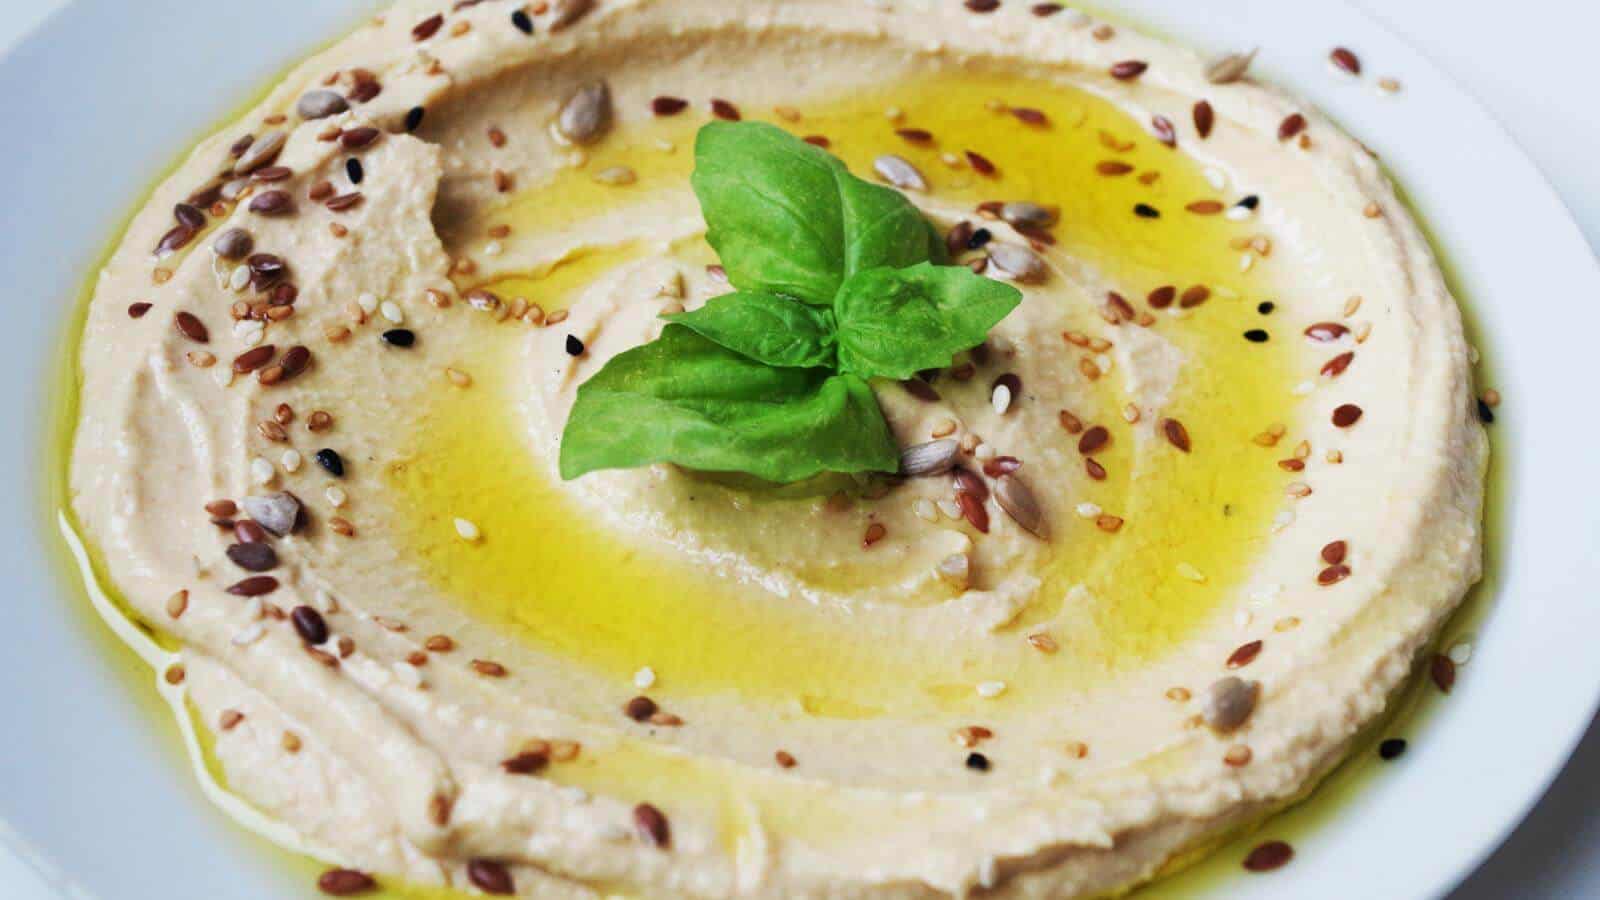 A bowl of hummus drizzled with oil.